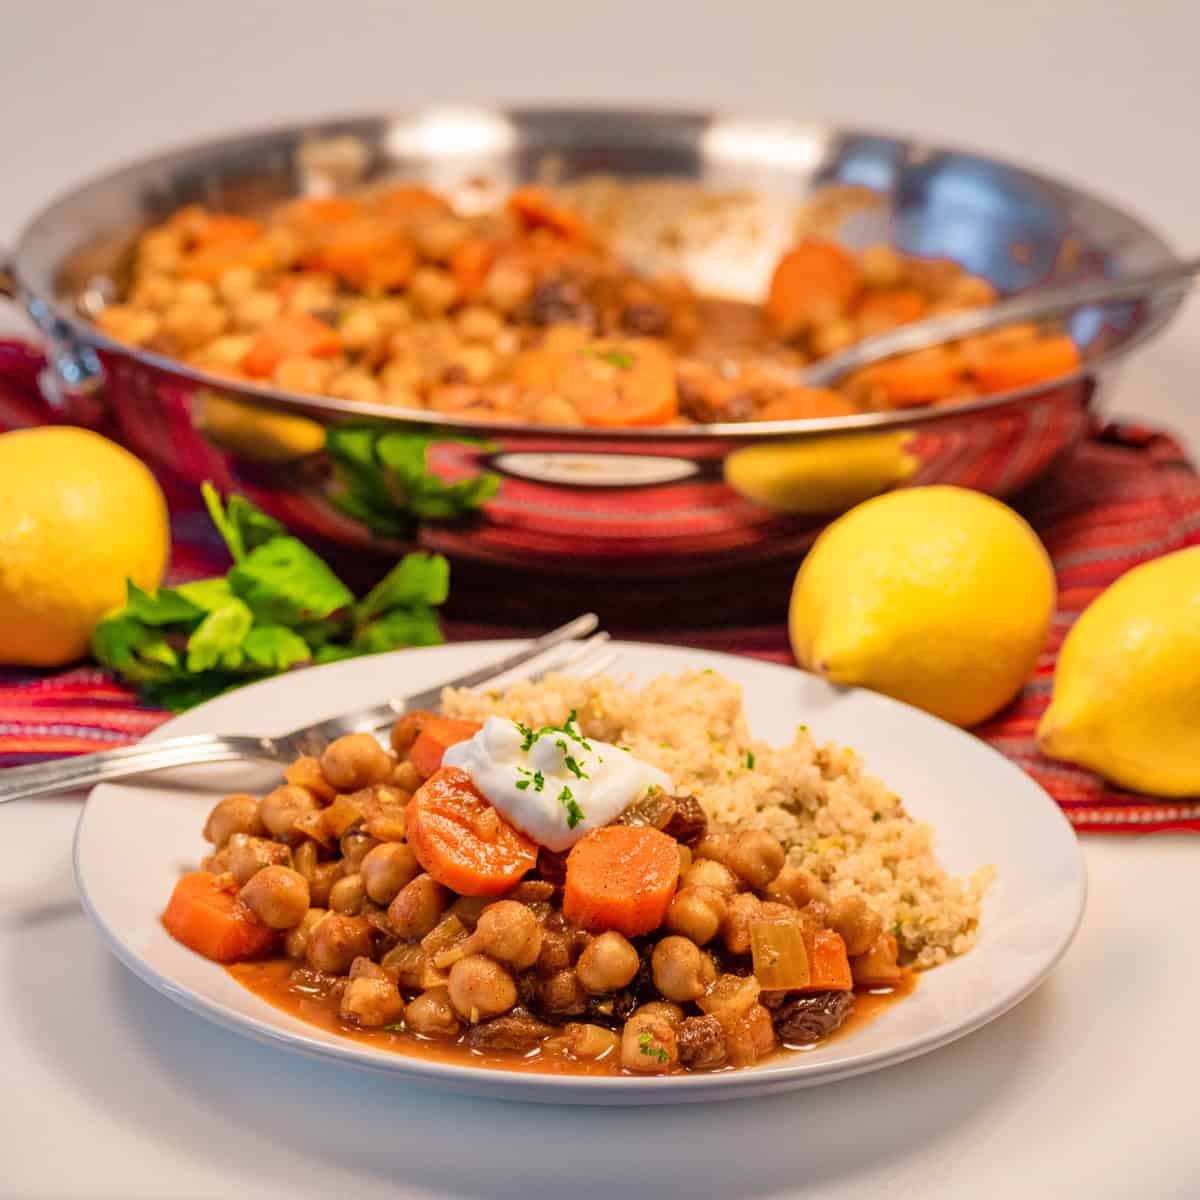 Chickpea tagine recipe served on a plate